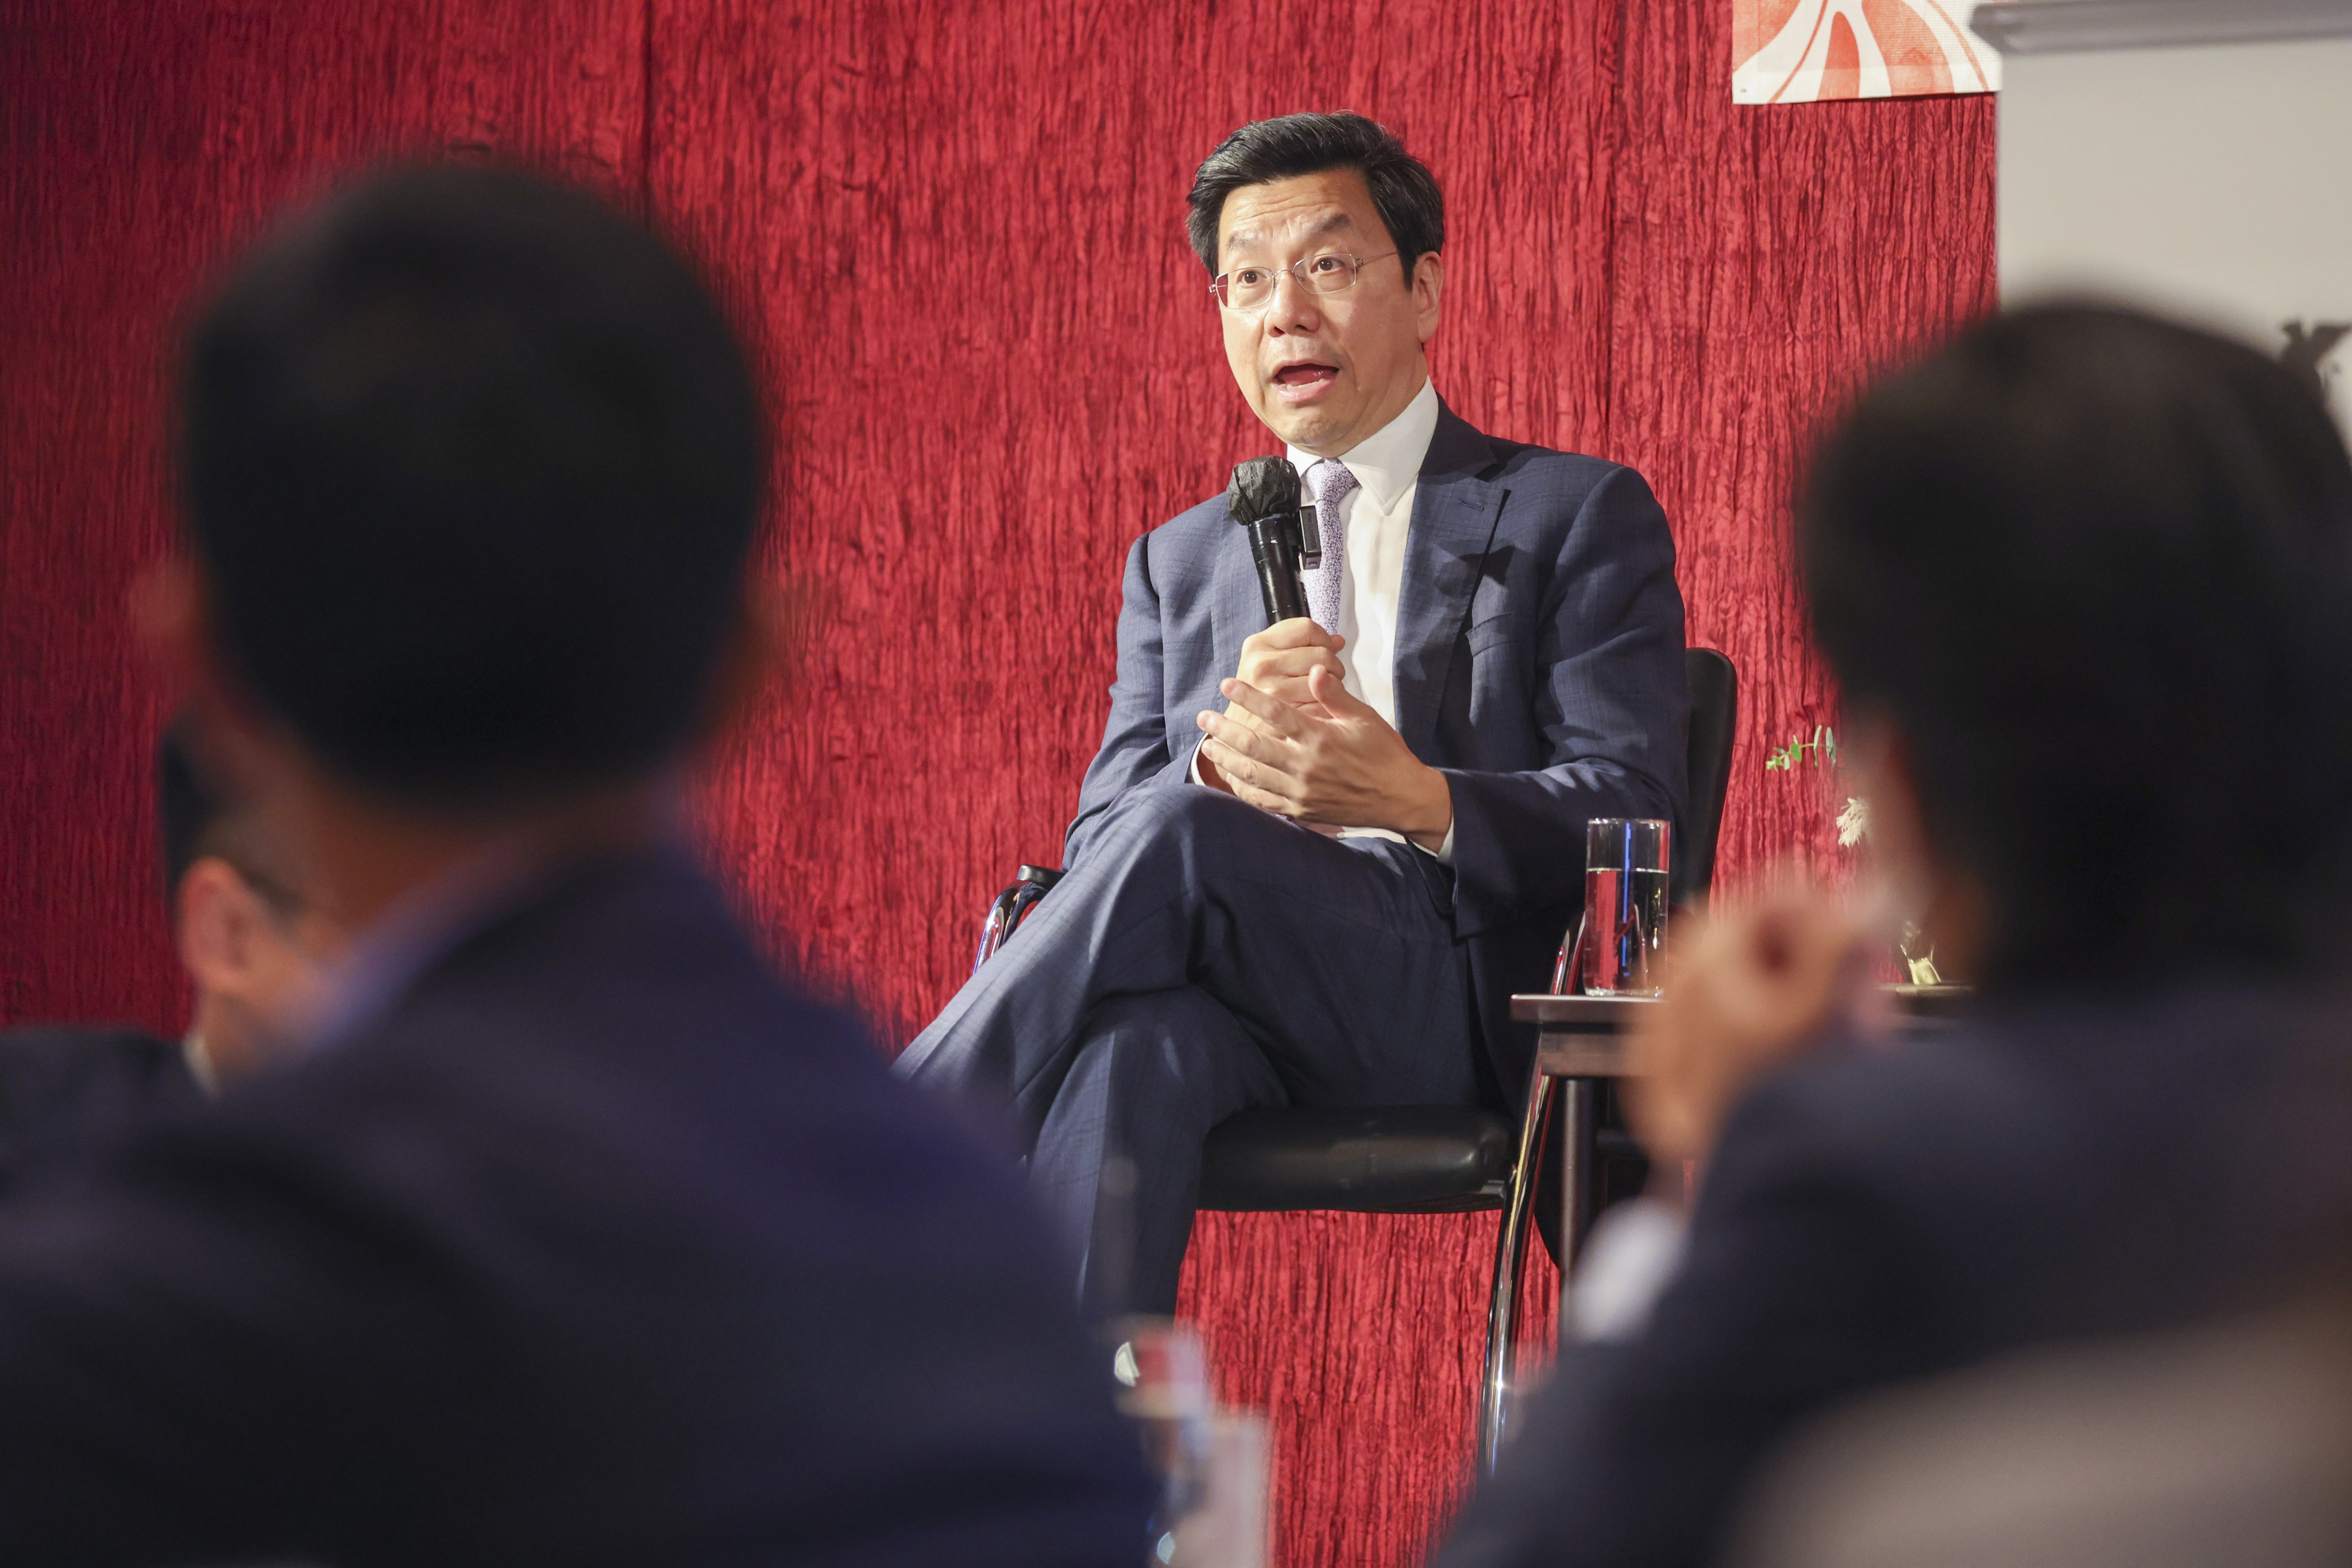 Lee Kai-fu, chairman and CEO of Sinovation Ventures, speaks at an event on artificial intelligence in Hong Kong on August 22, 2022. Photo: Edmond So